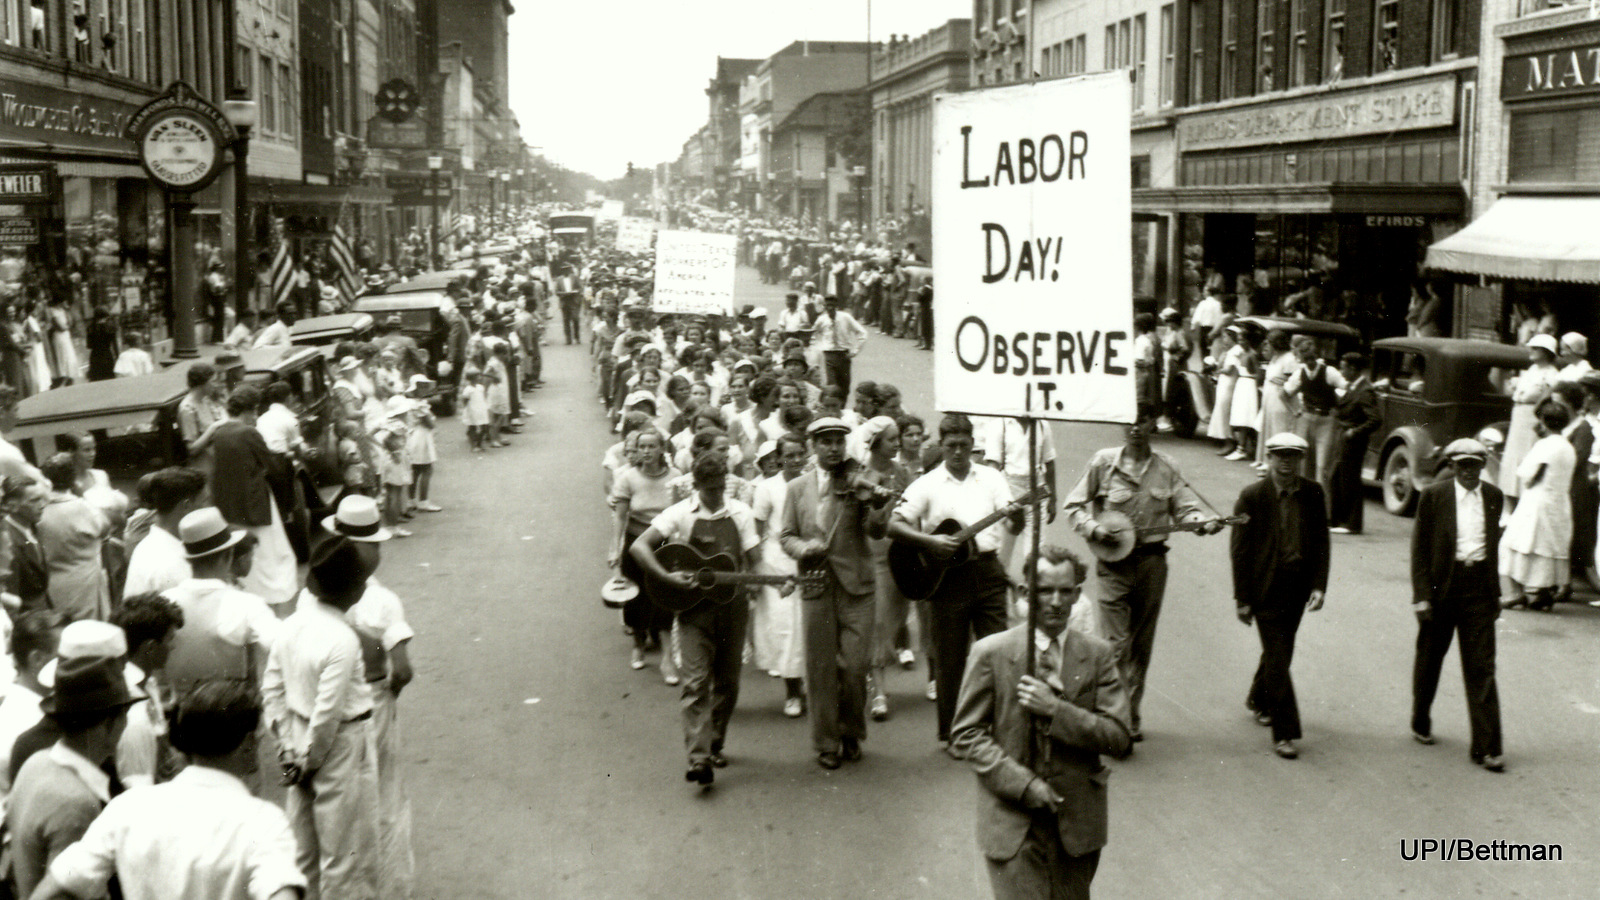 Striking textile workers march during a Labor Day parade in 1934 in Gastonia, North Carolina. abor Day, an annual celebration of workers and their achievements, originated during one of American labor history’s most dismal chapters.